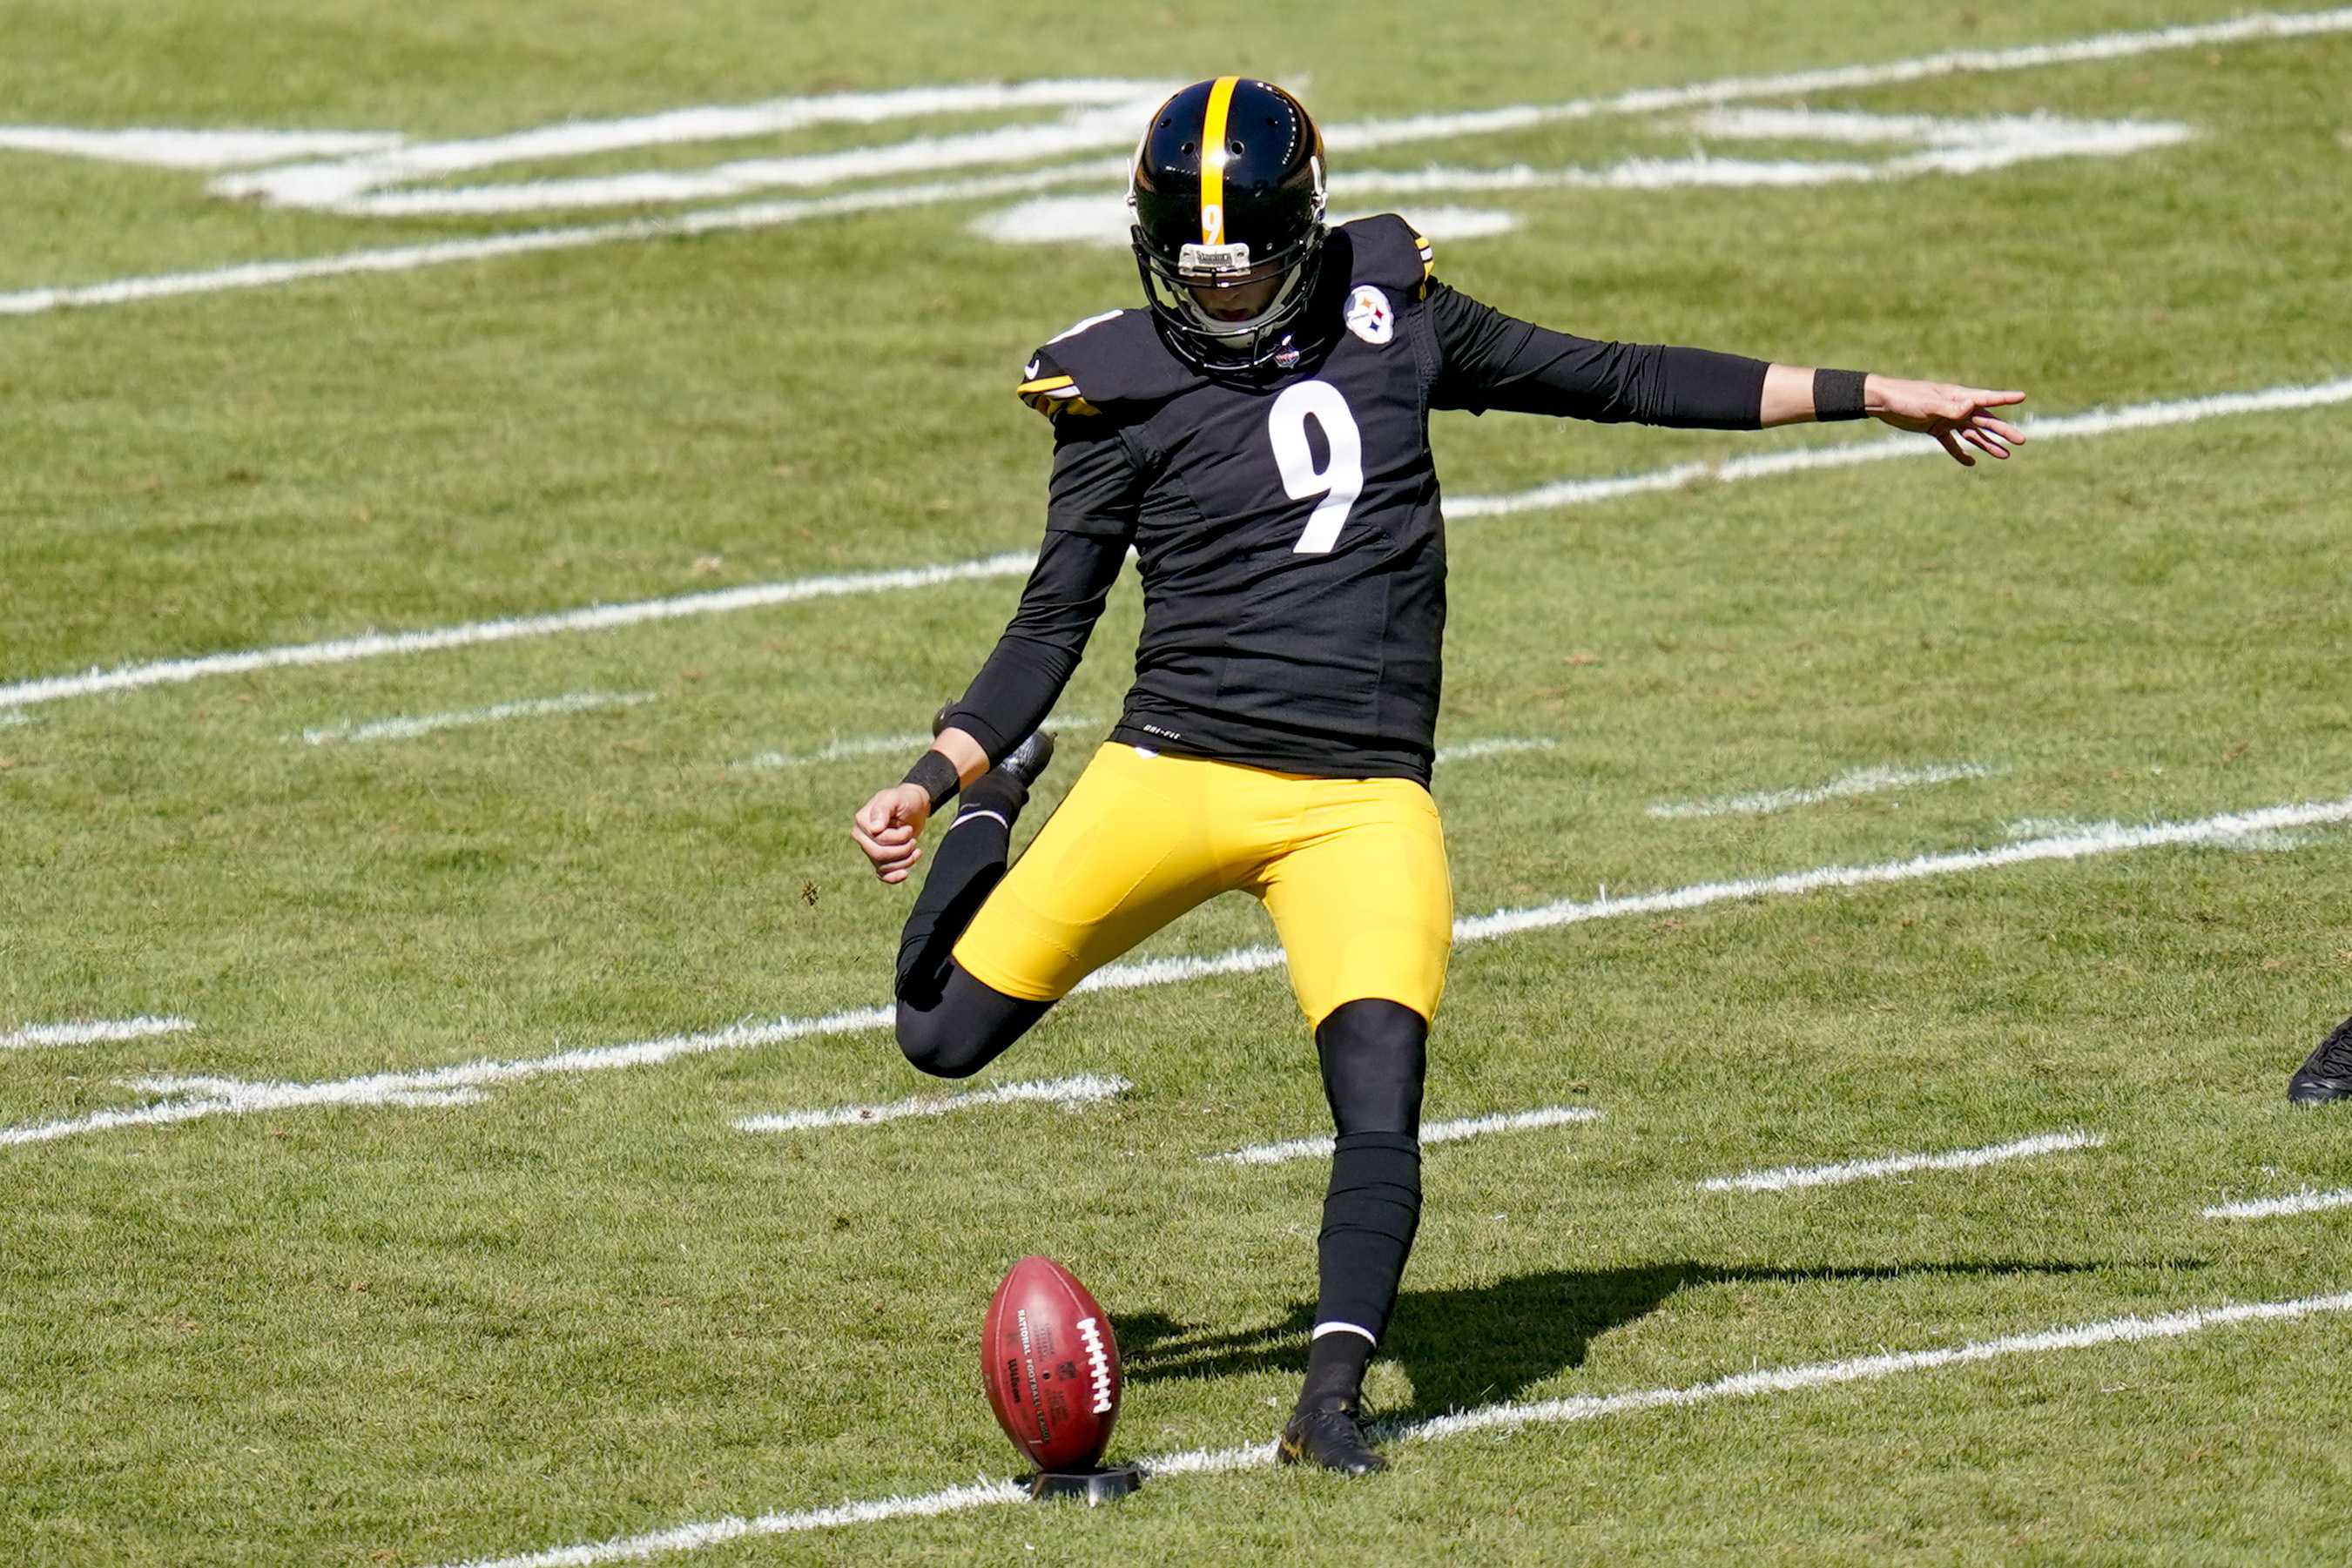 Chris Boswell, Contract extension, Steelers kicker, Precision kicking, Key player signing, 2710x1810 HD Desktop